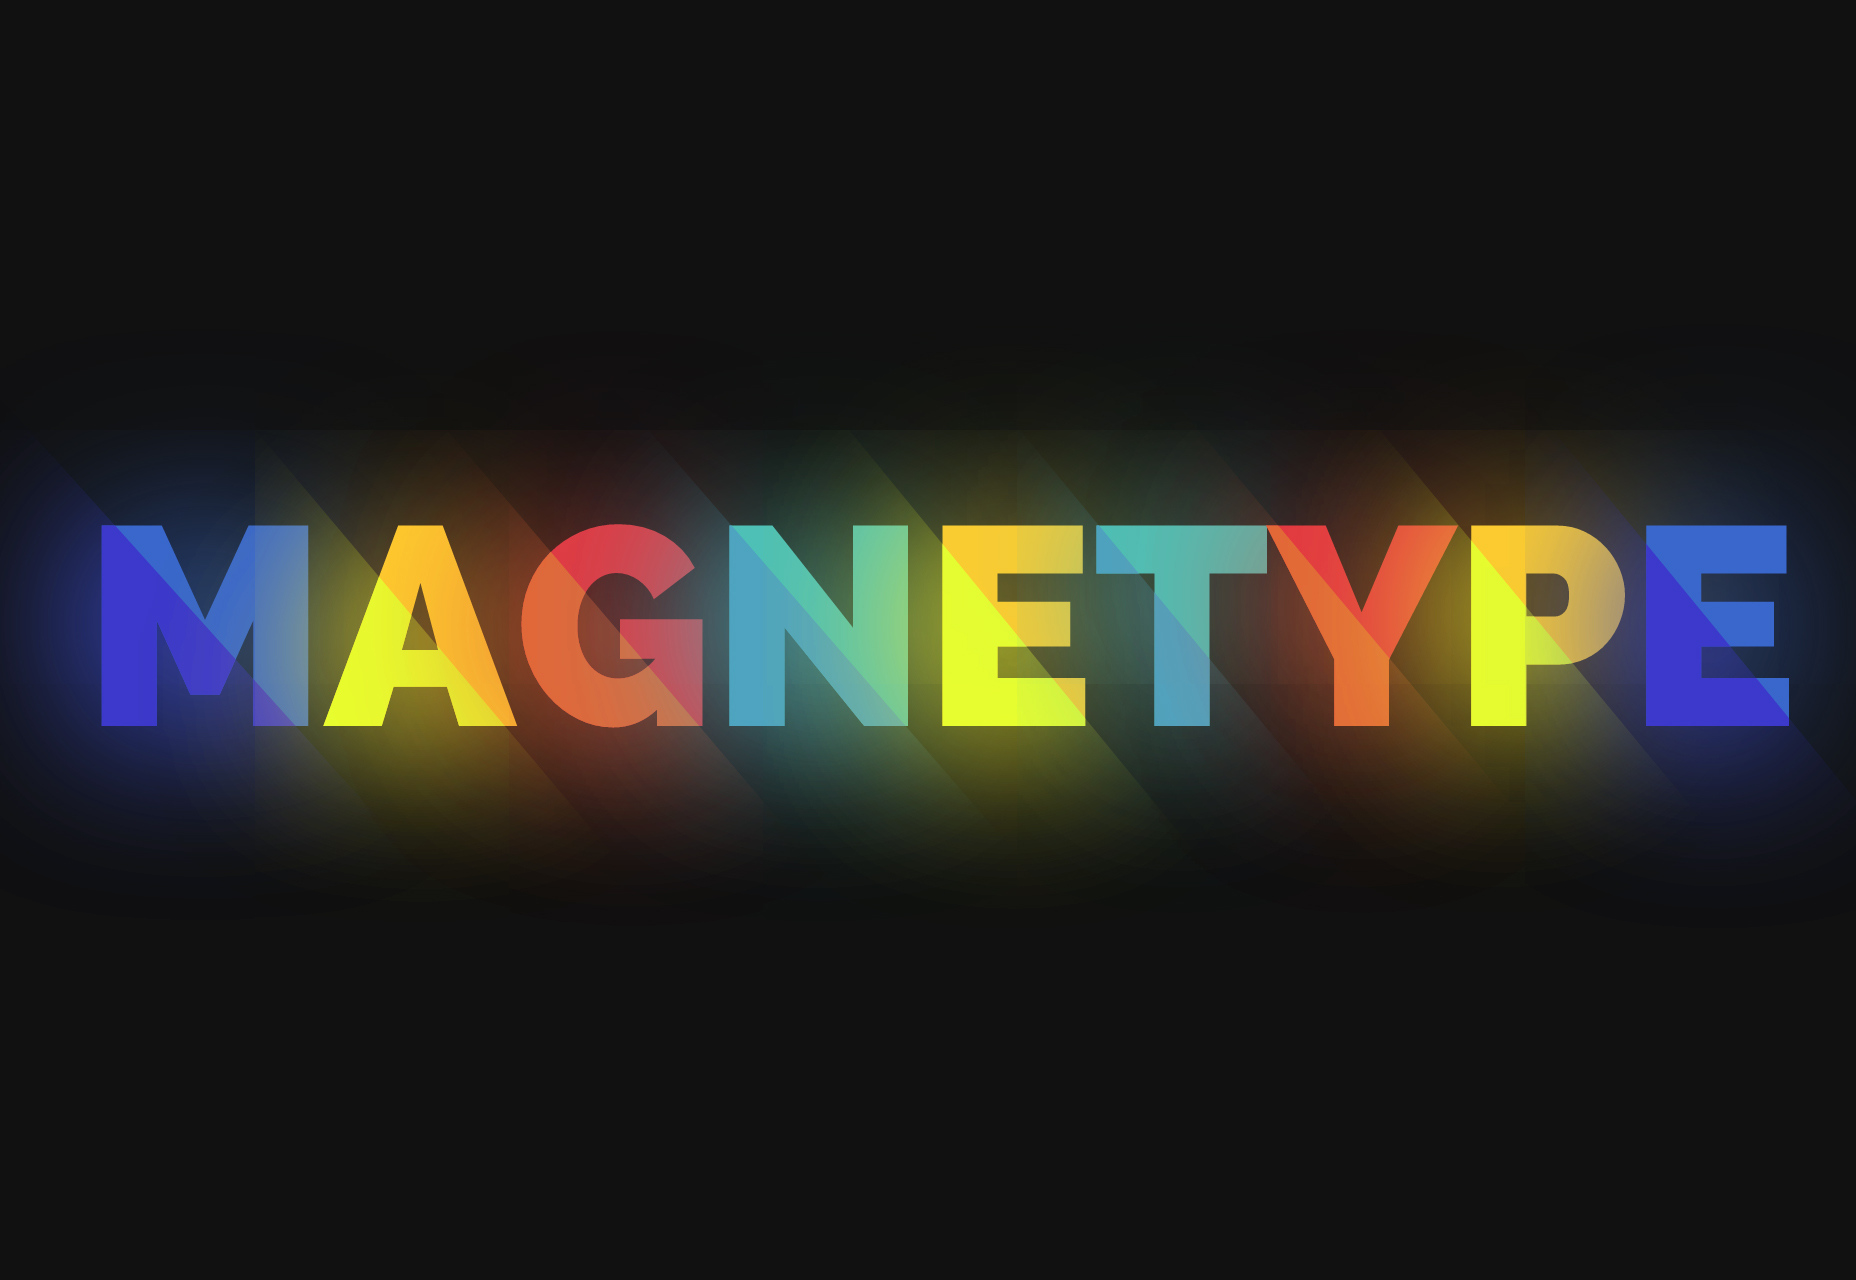 Magnetype: Bright Text Effect and Animation